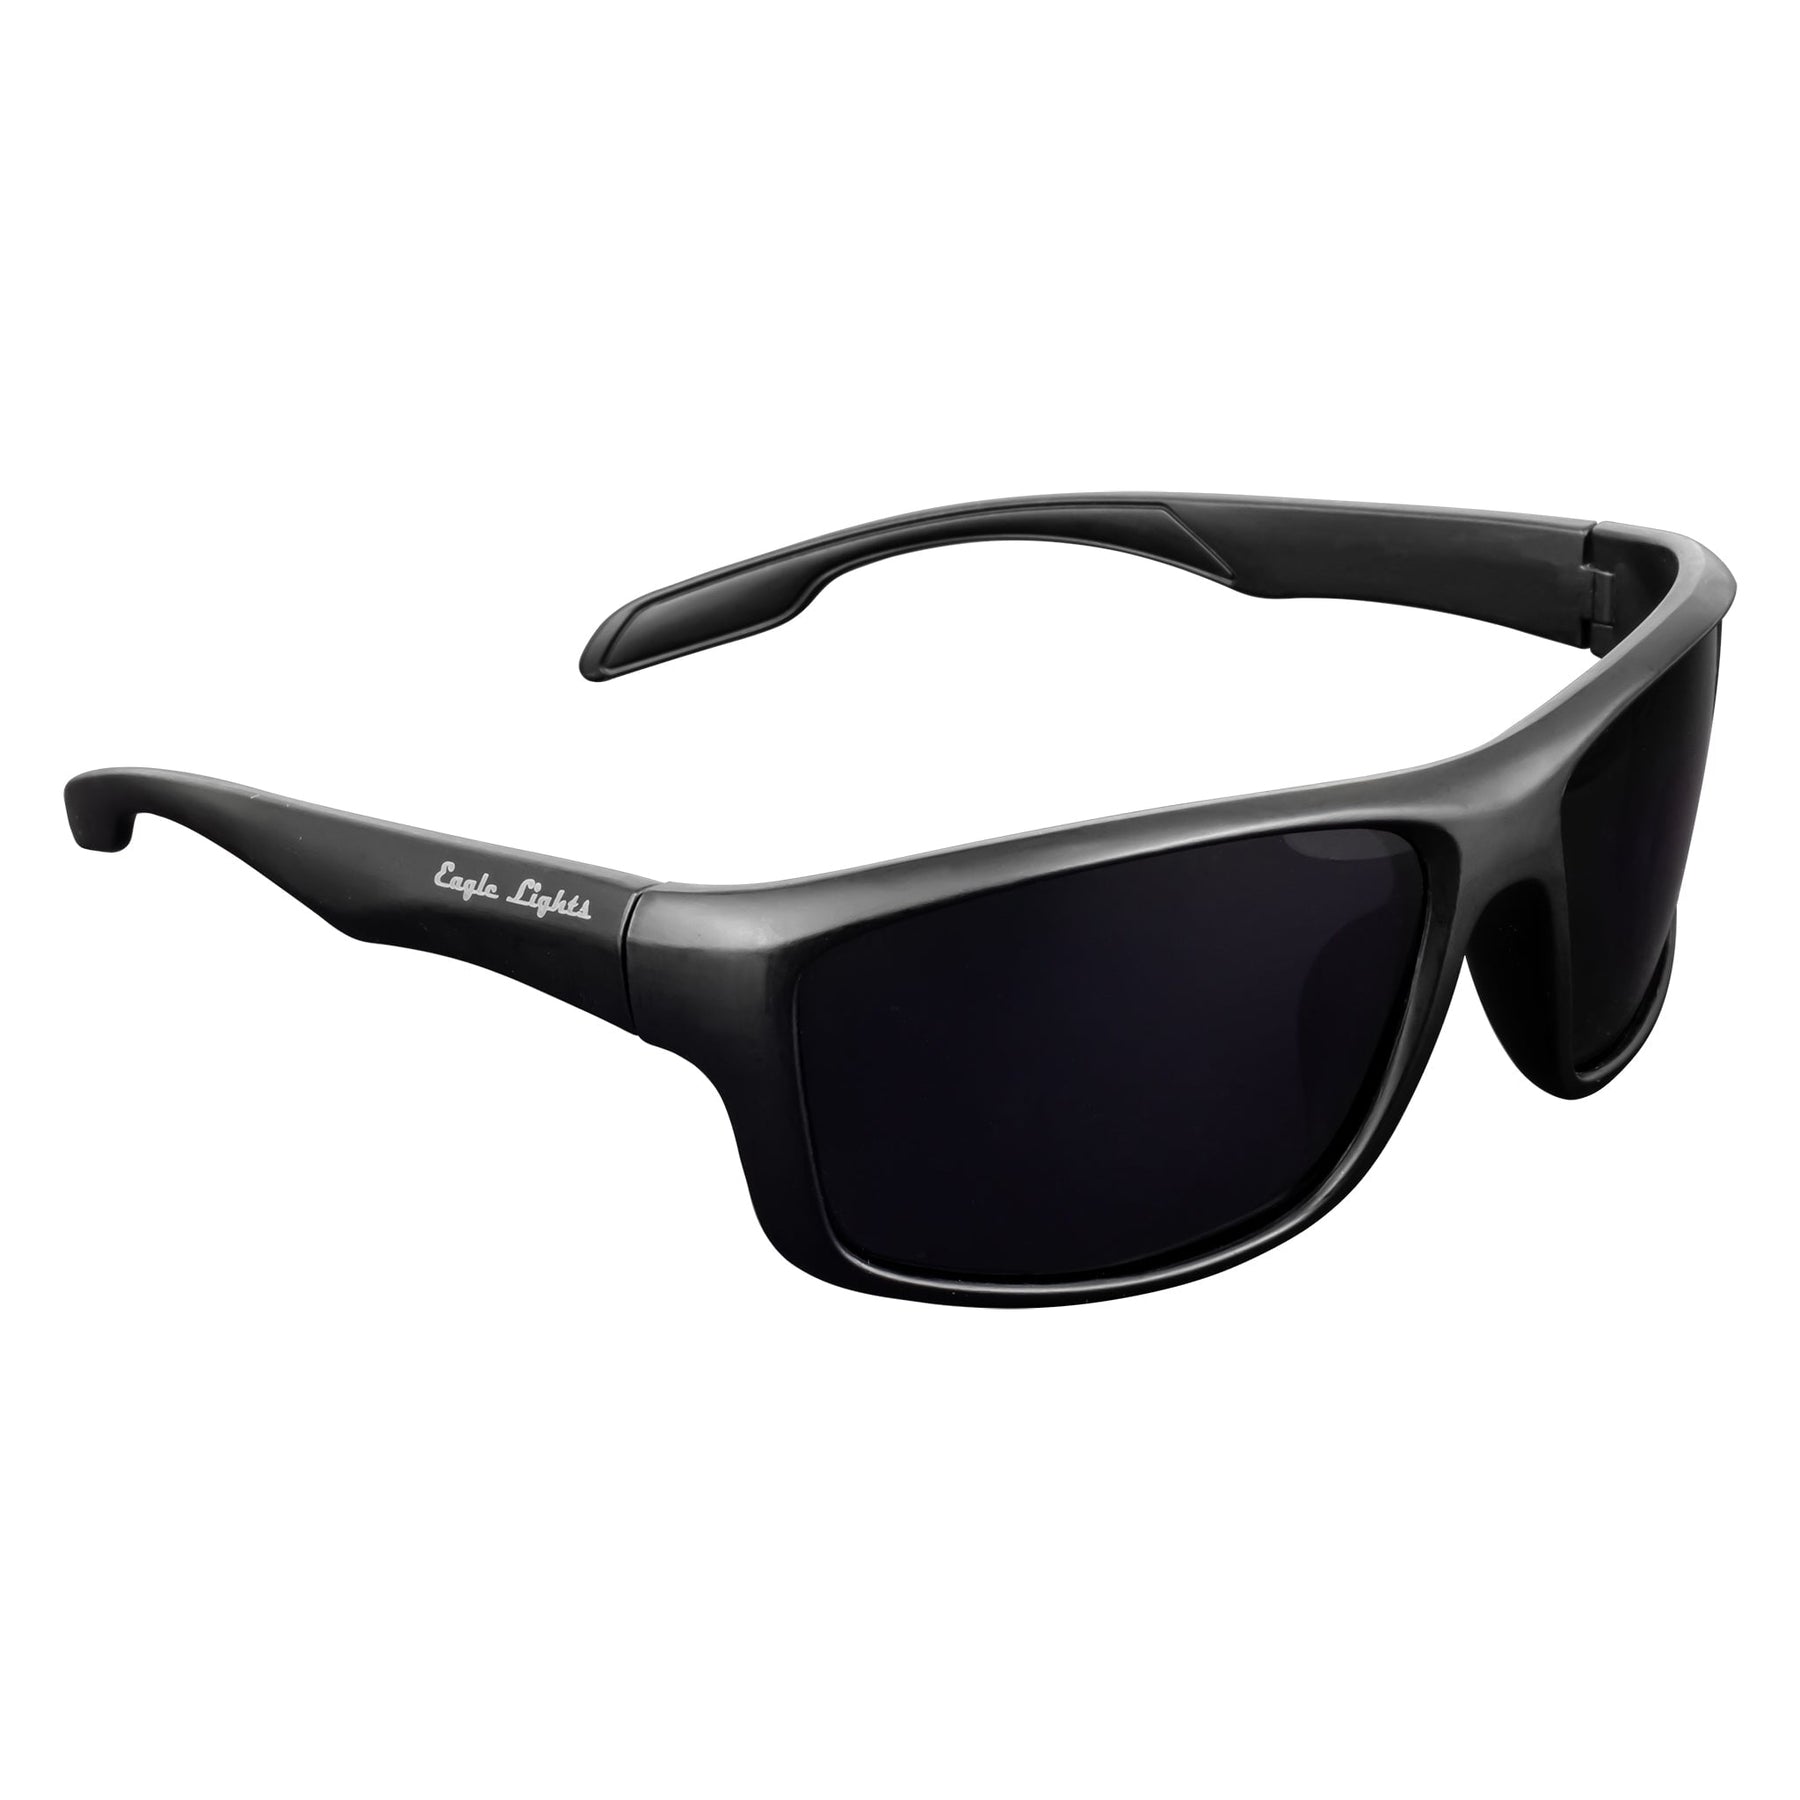 Sports Sunglasses For Men In India Flat 10% OFF